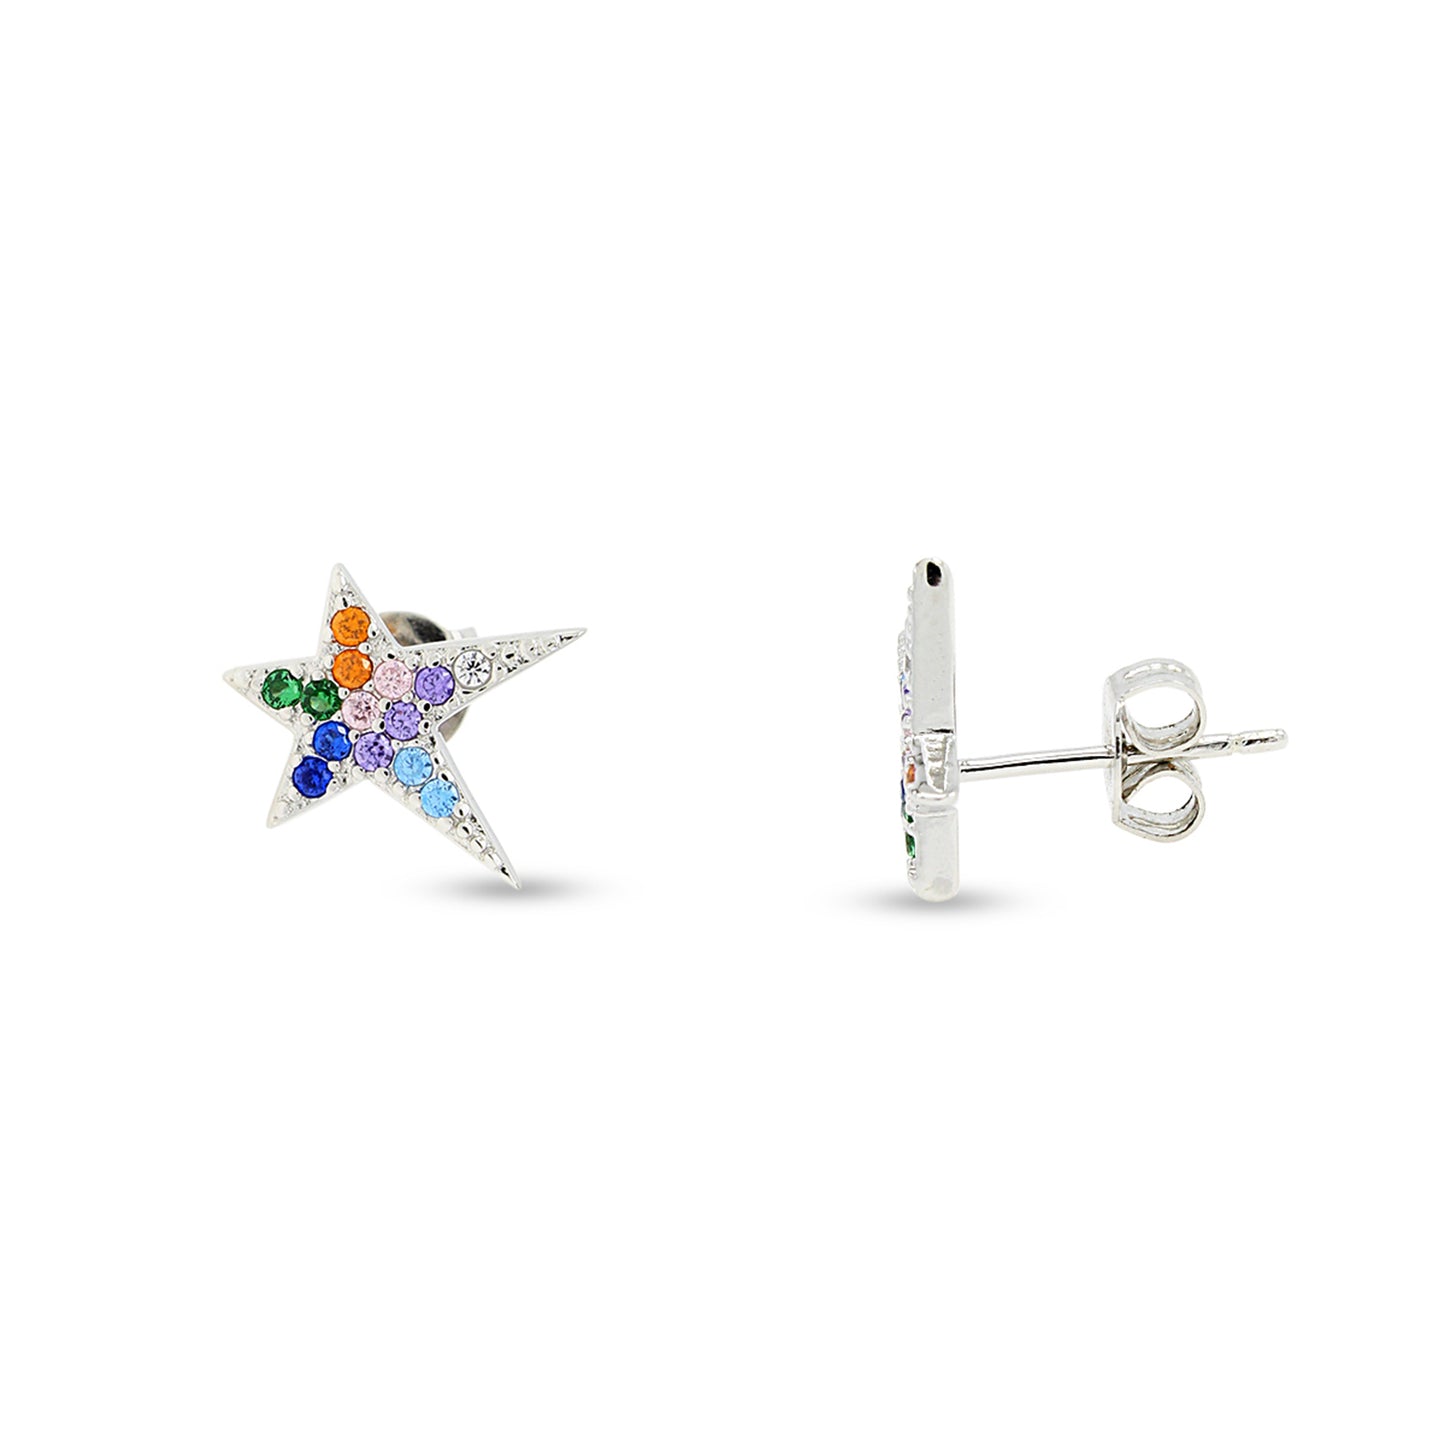 Colourful Rainbow Cubic Zirconia Tiny Dainty Starburst Stud Earrings For Women In 14K Gold Plated 925 Sterling Silver